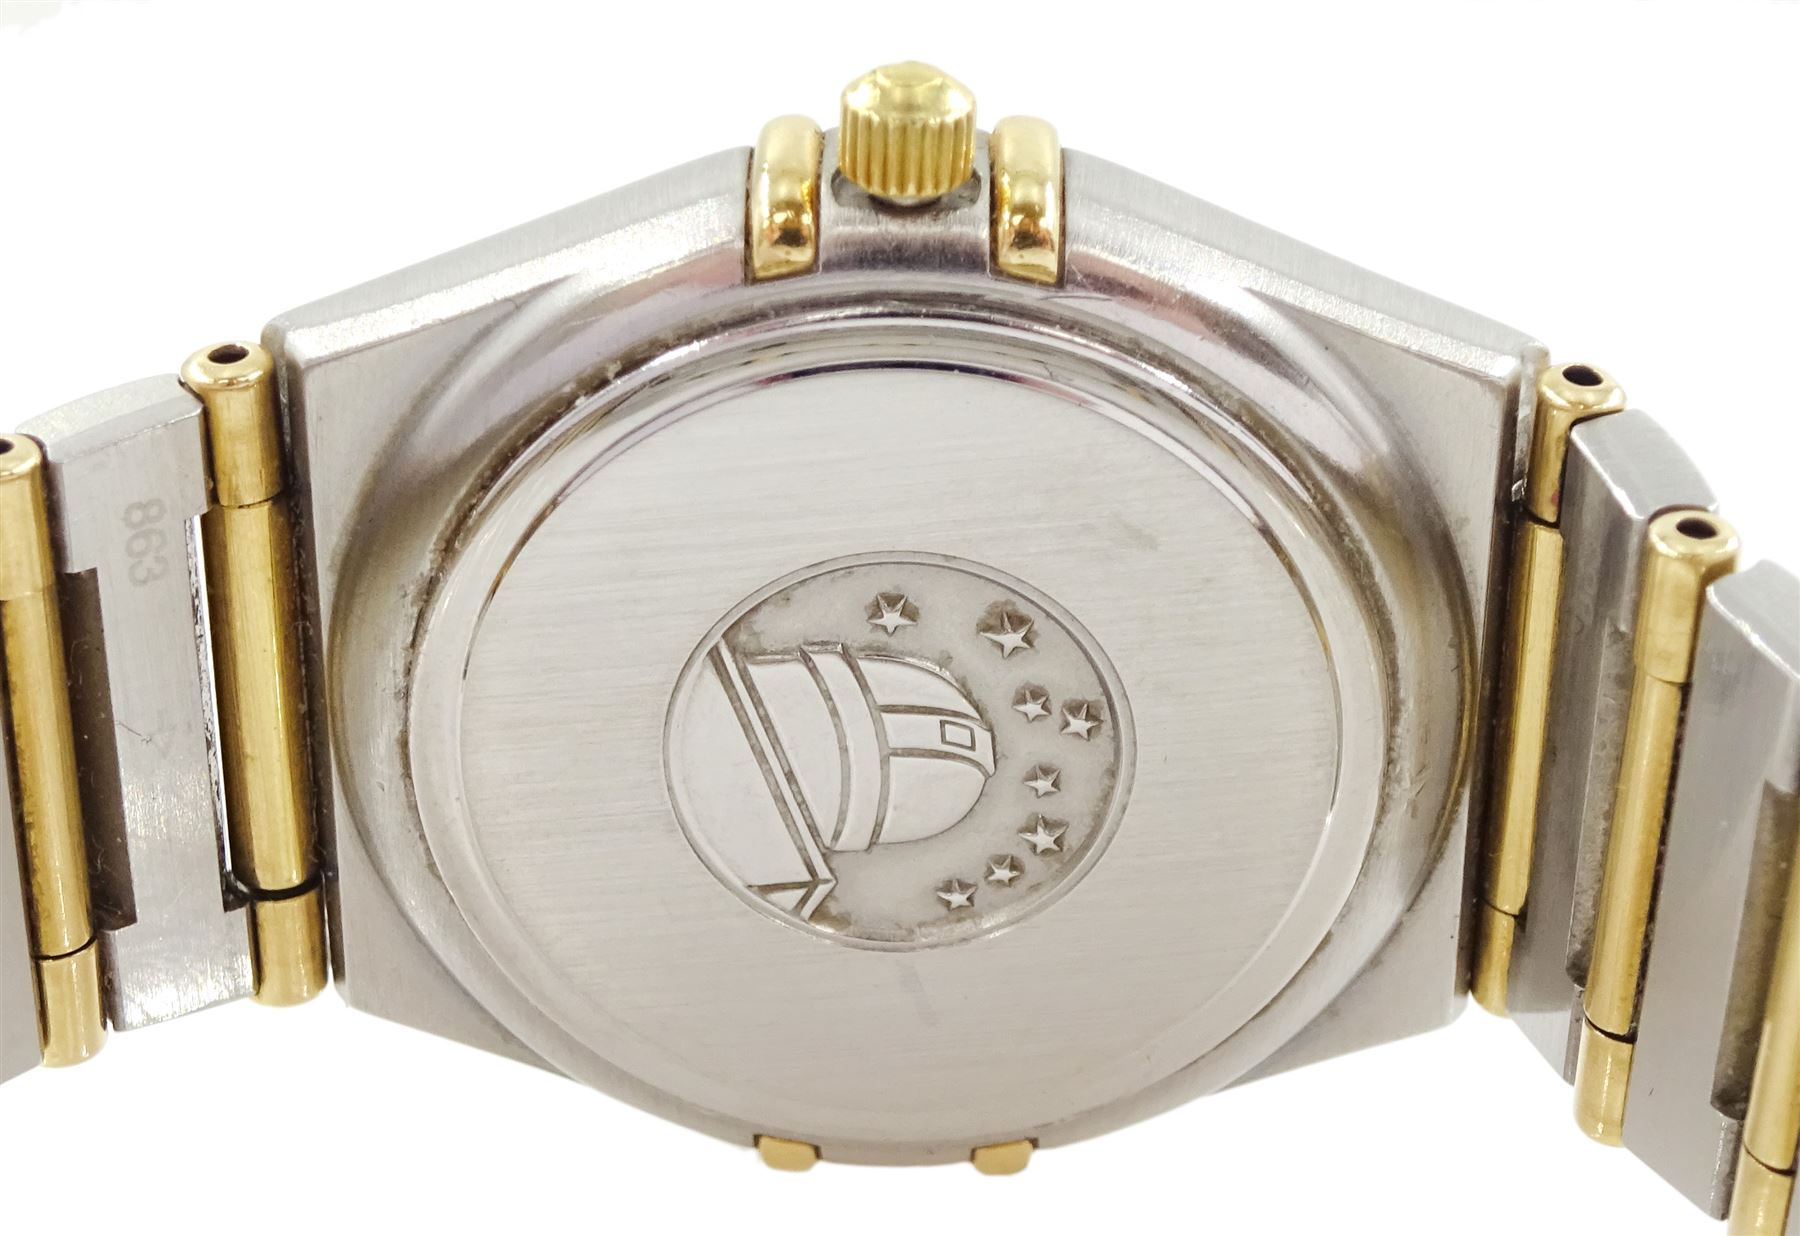 Omega Constellation ladies gold and stainless steel quartz wristwatch - Image 3 of 3